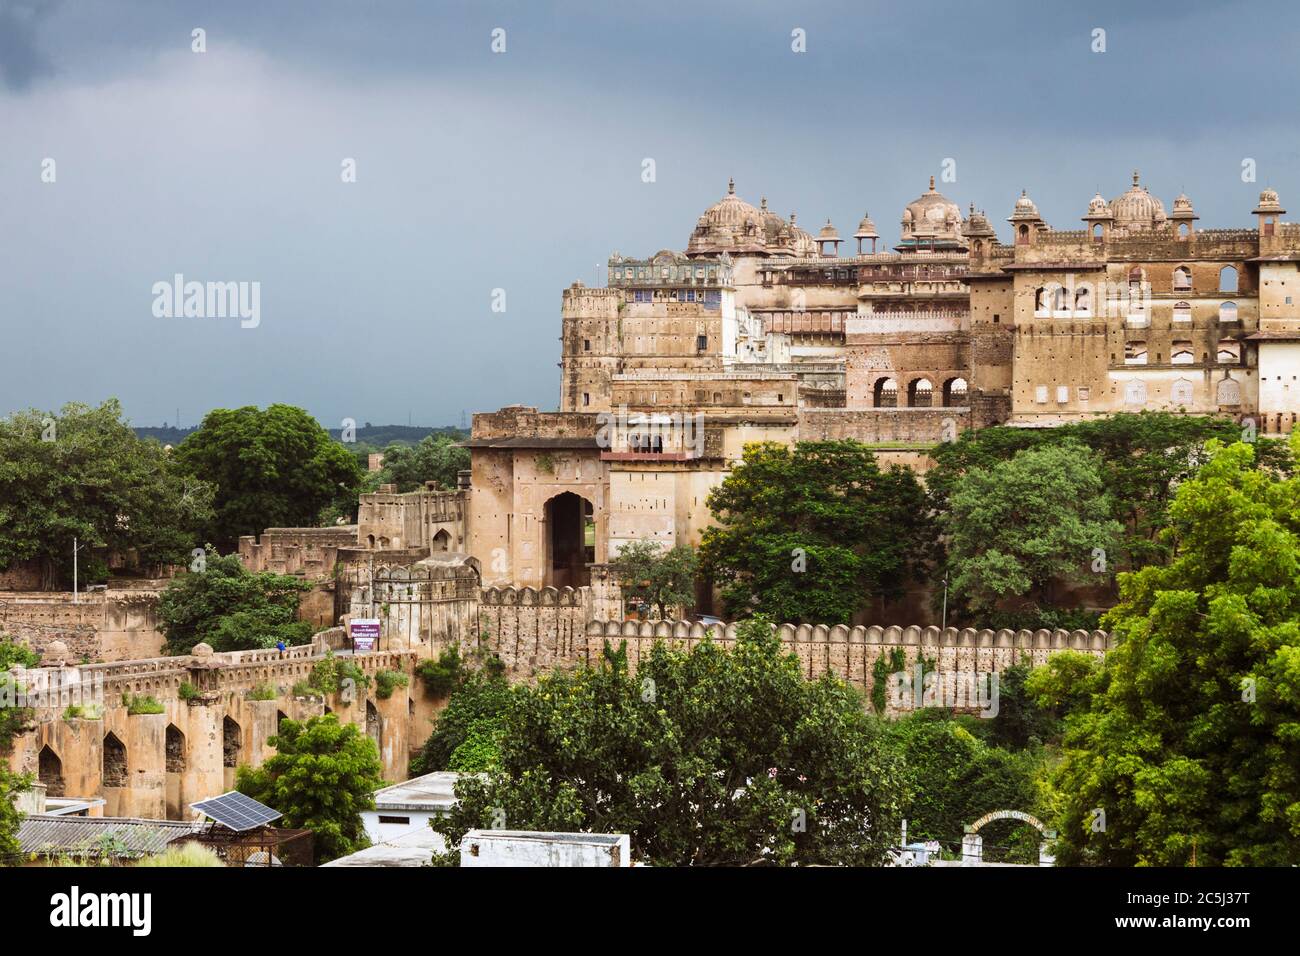 Orchha, Madhya Pradesh, India : General view of the Orchha Fort complex built by the Bundela Rajputs starting from the early 16th century. Stock Photo